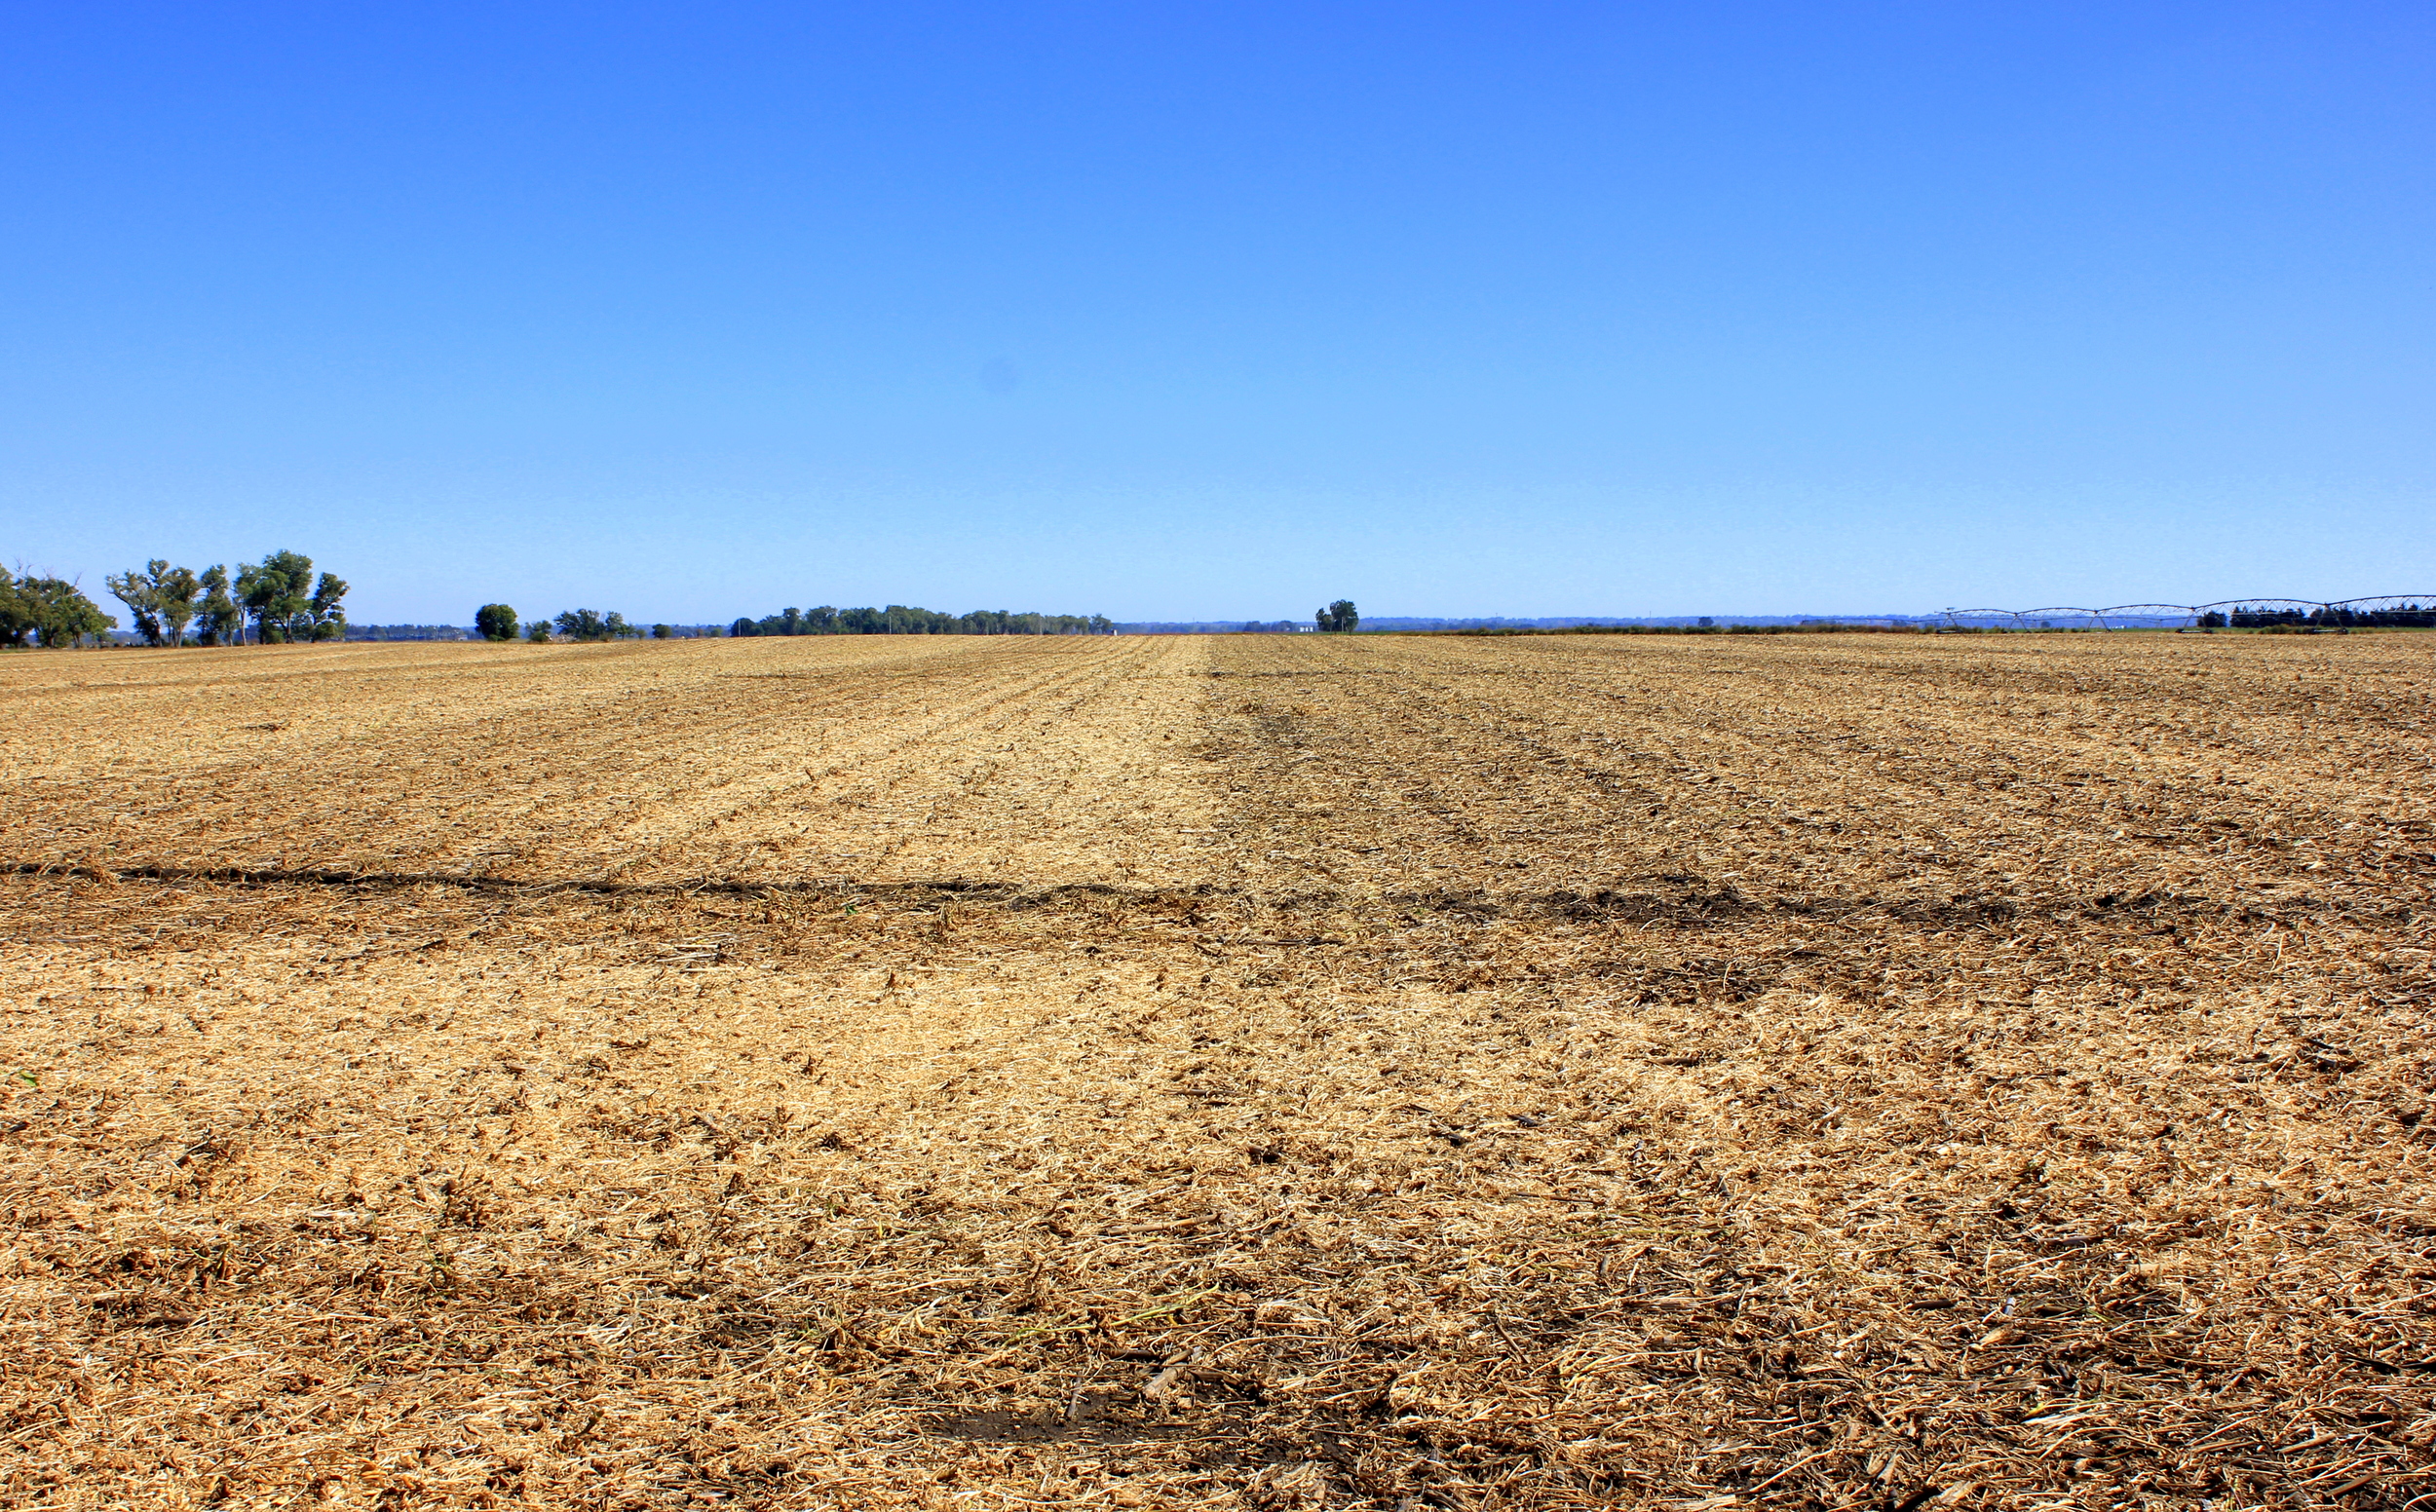 Soybean stubble (and a bit of leftover milo residue)